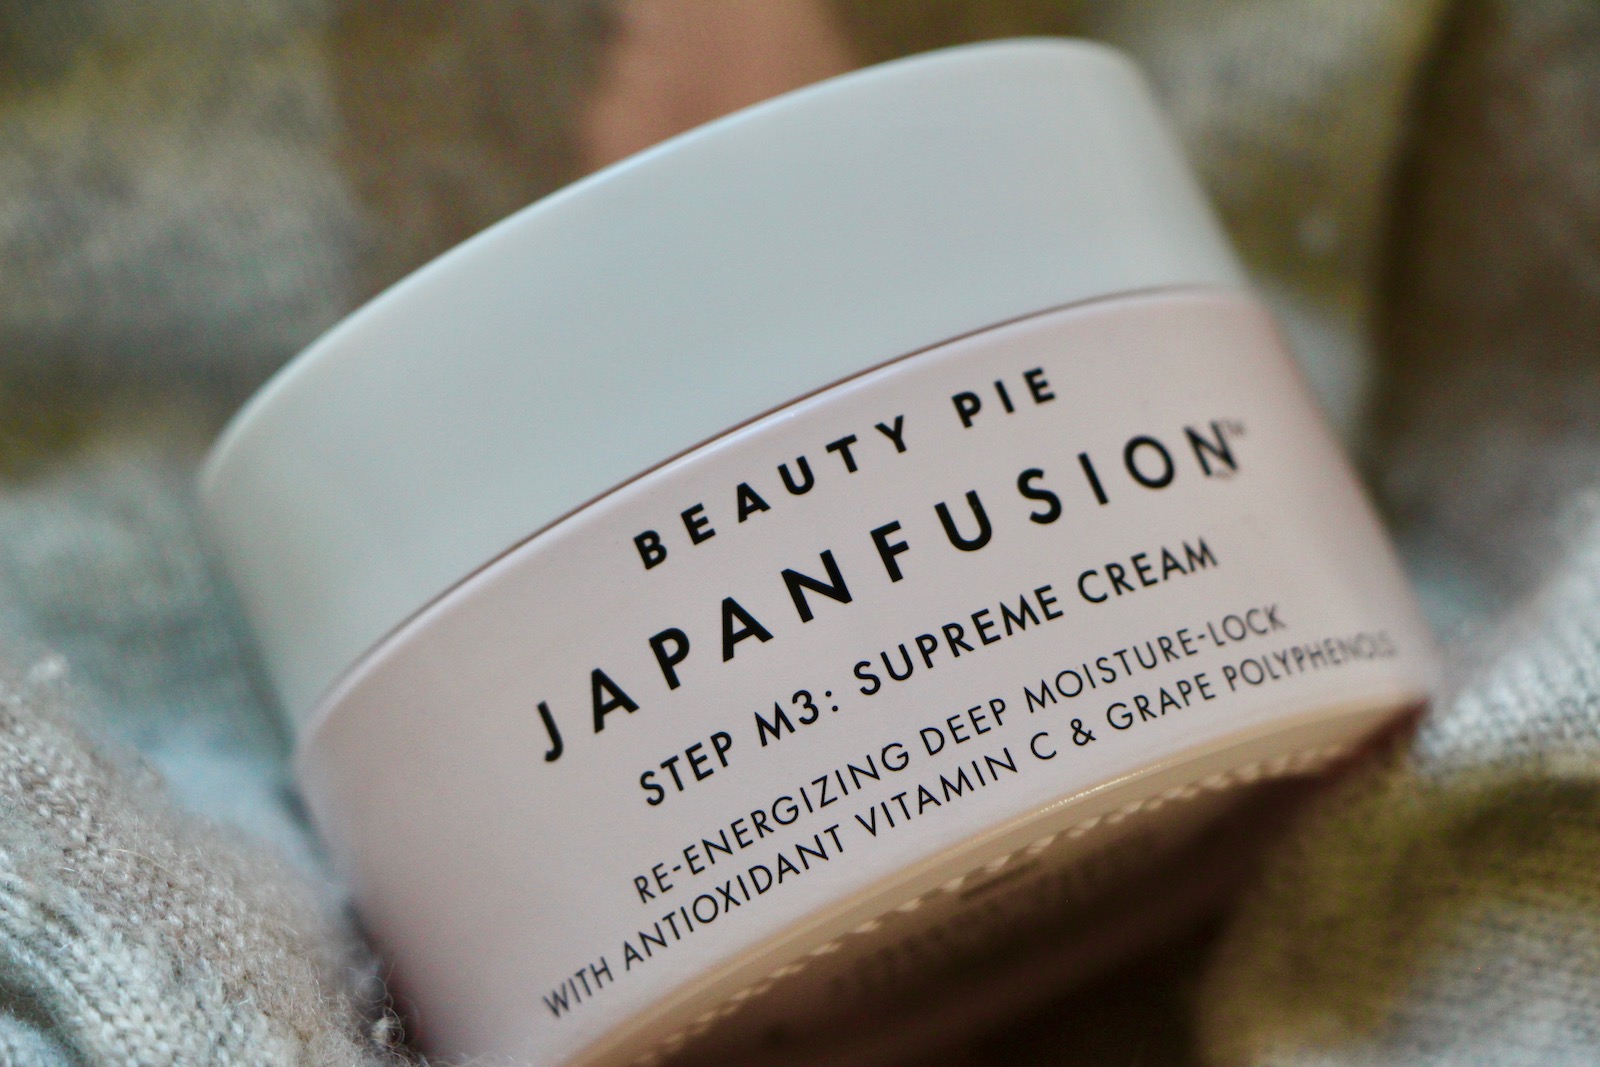 Japanfusion: A Truly Supreme Cream - Ruth Crilly